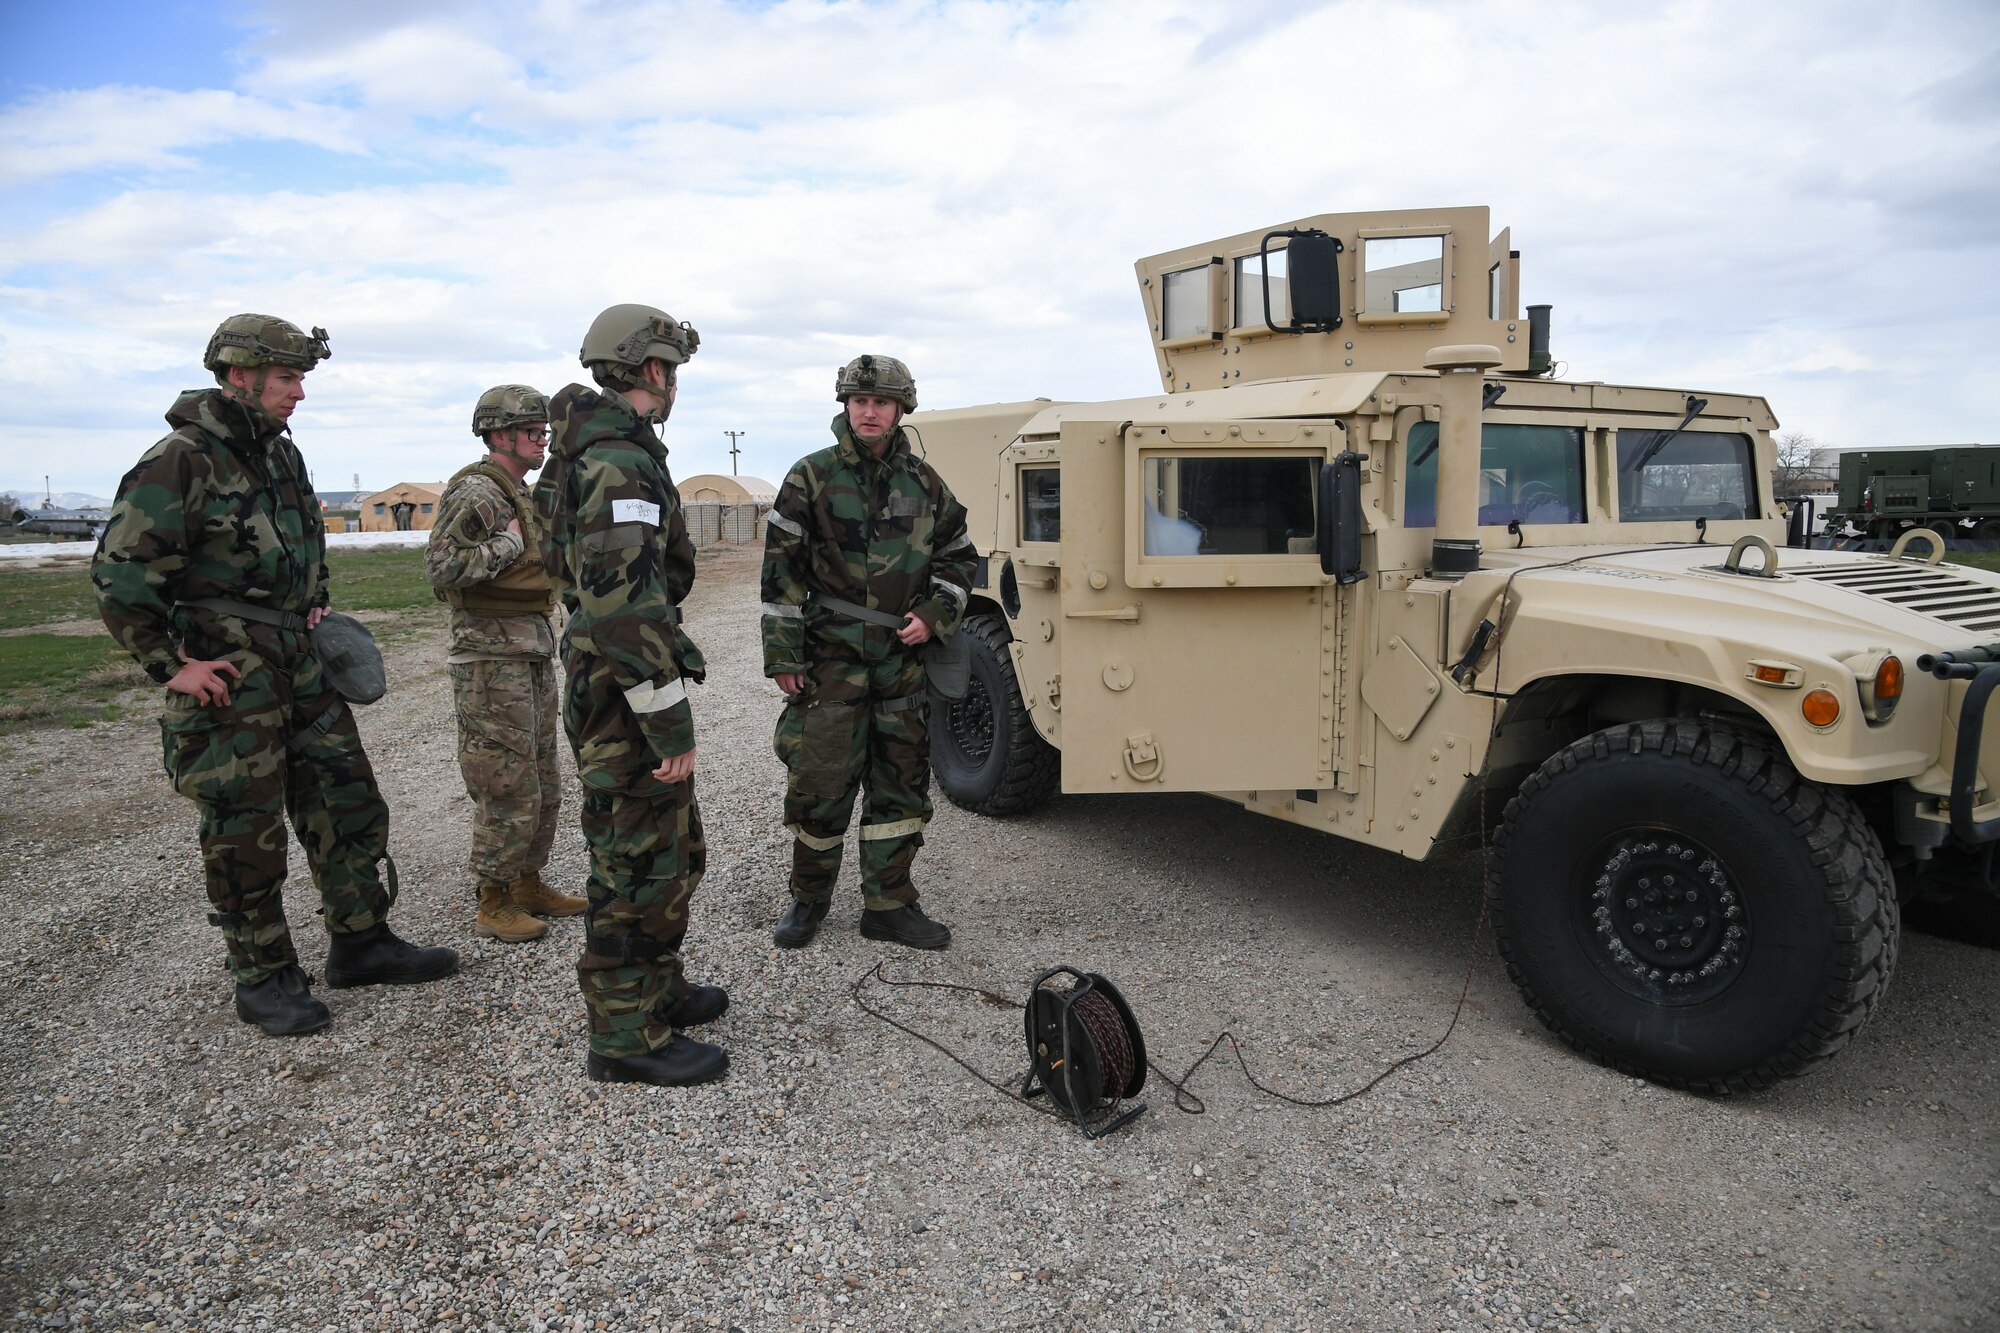 The 419th Explosive Ordnance Disposal team prepared to check for threats April 5 during the 419th Civil Engineer Squadron’s four-day mock deployment